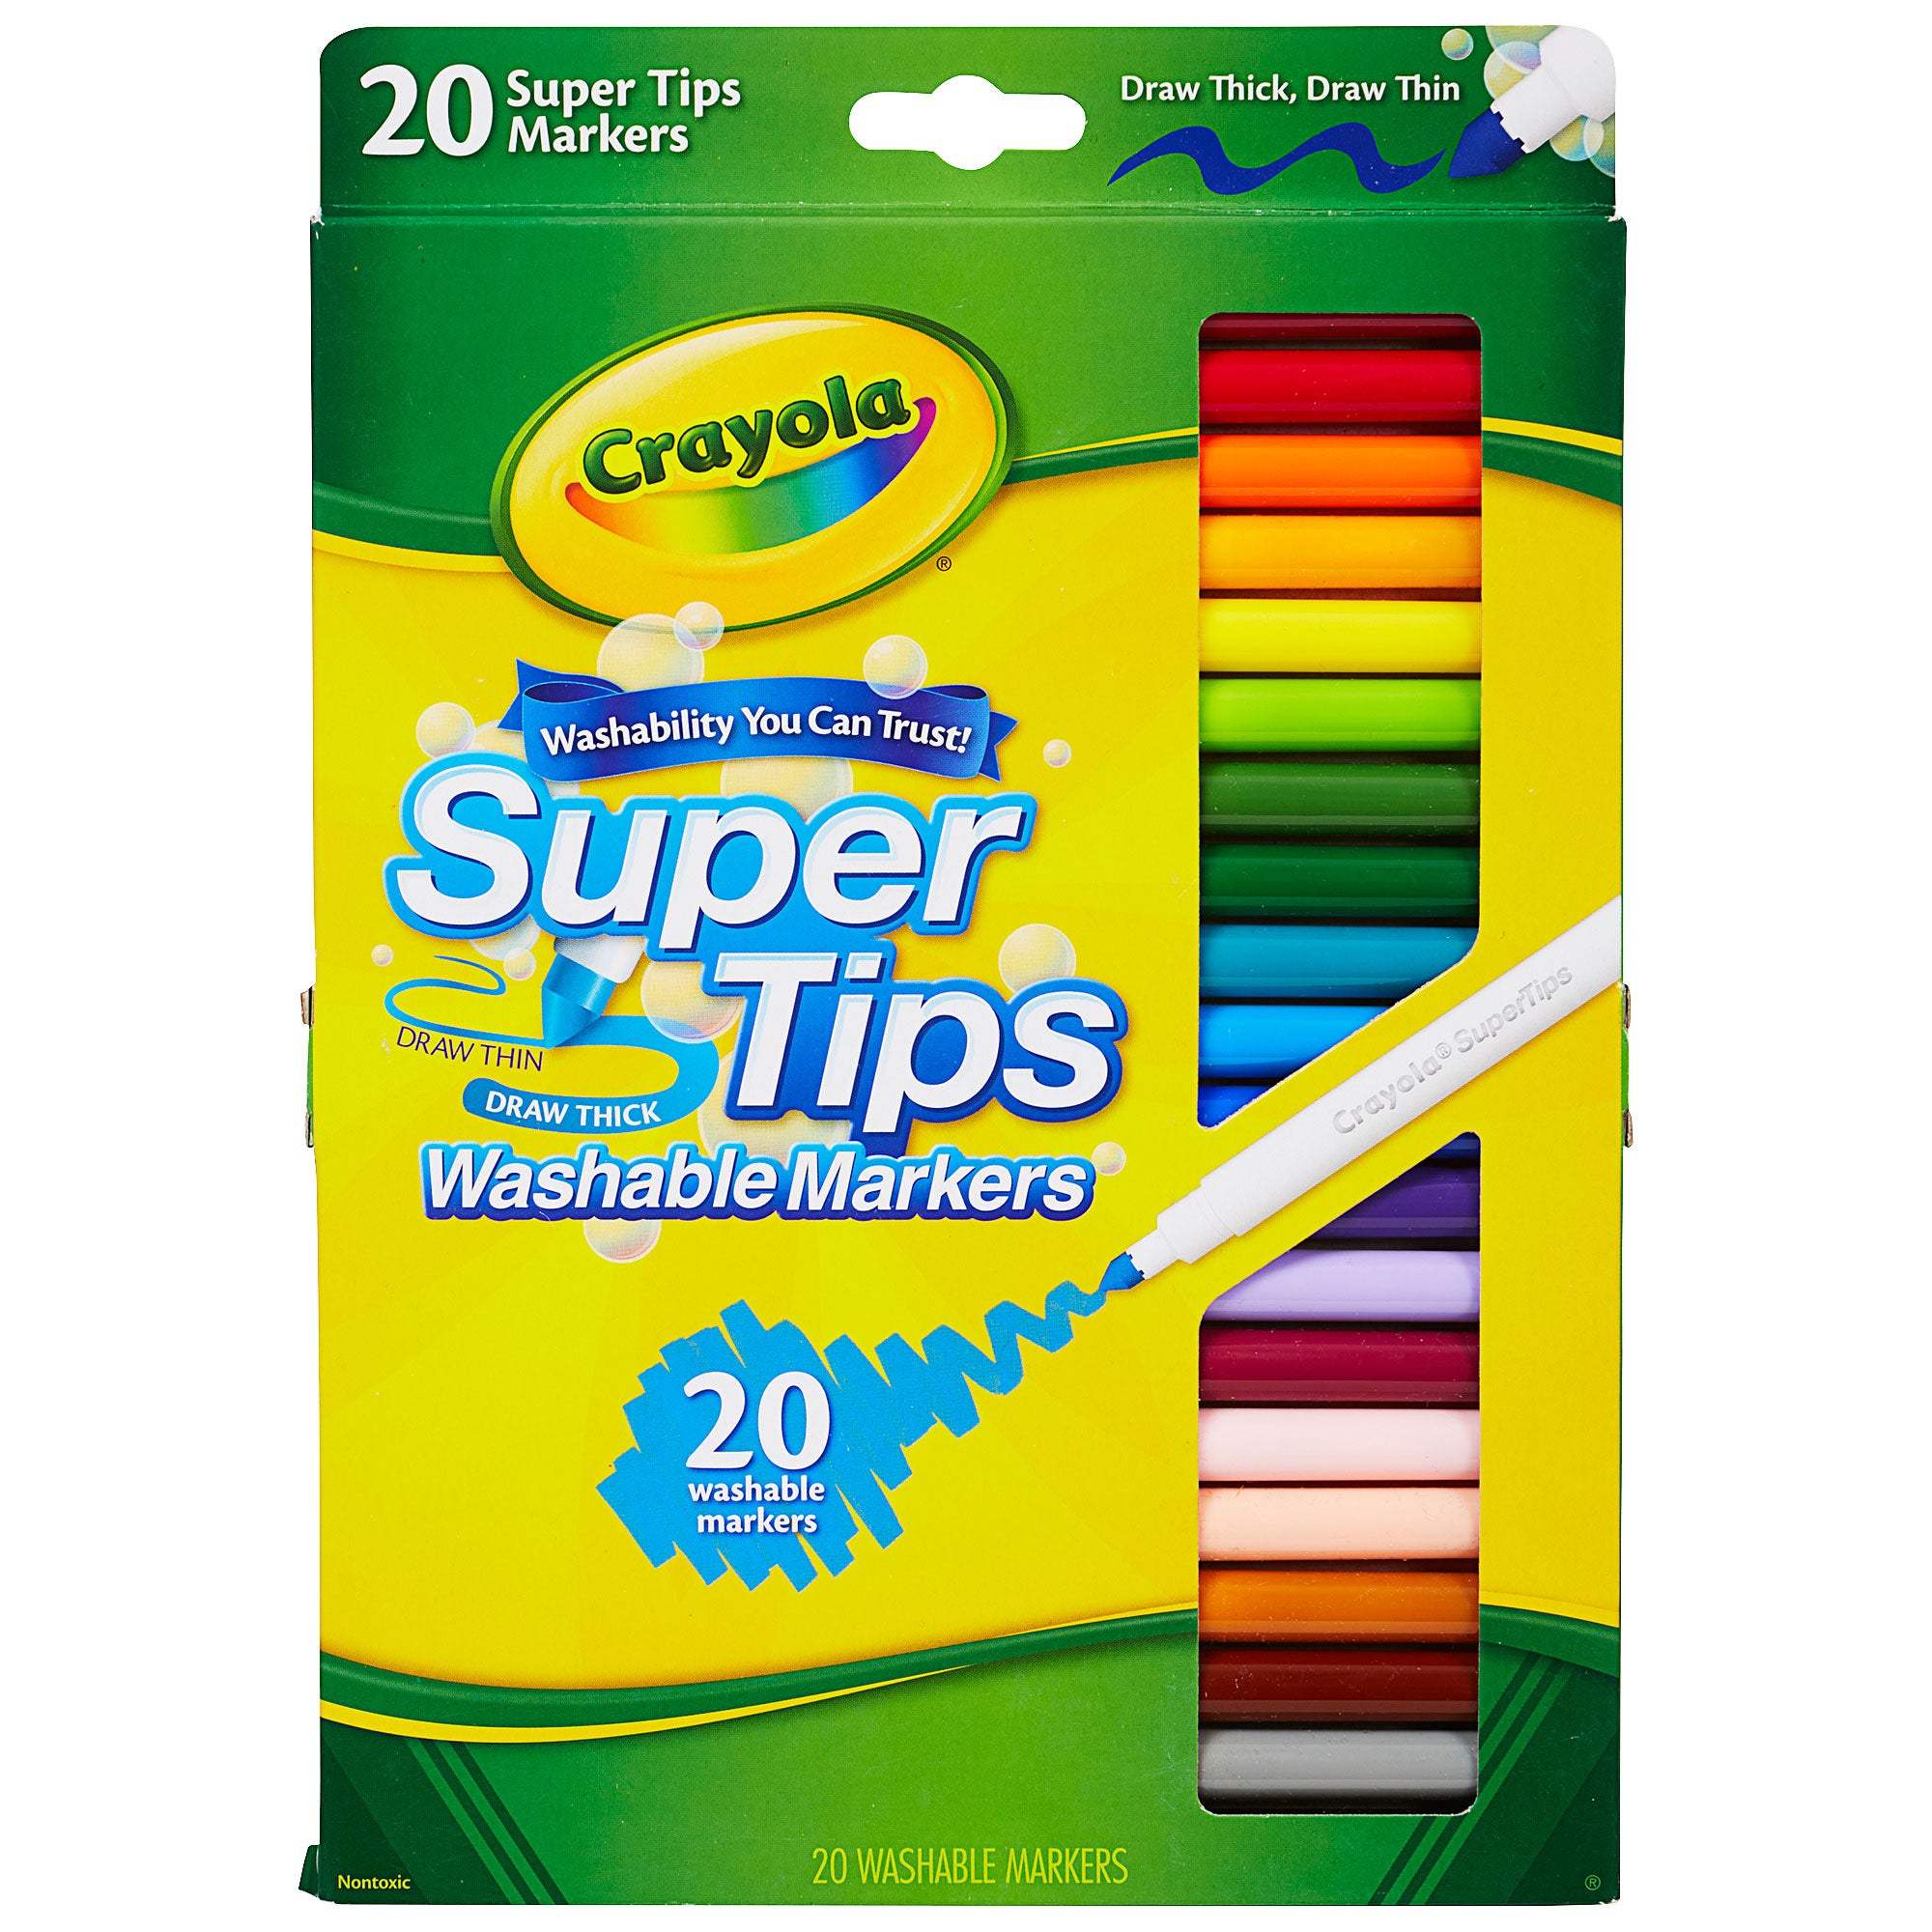 Crayola Super Tips Markers 20pk | The Reject Shop